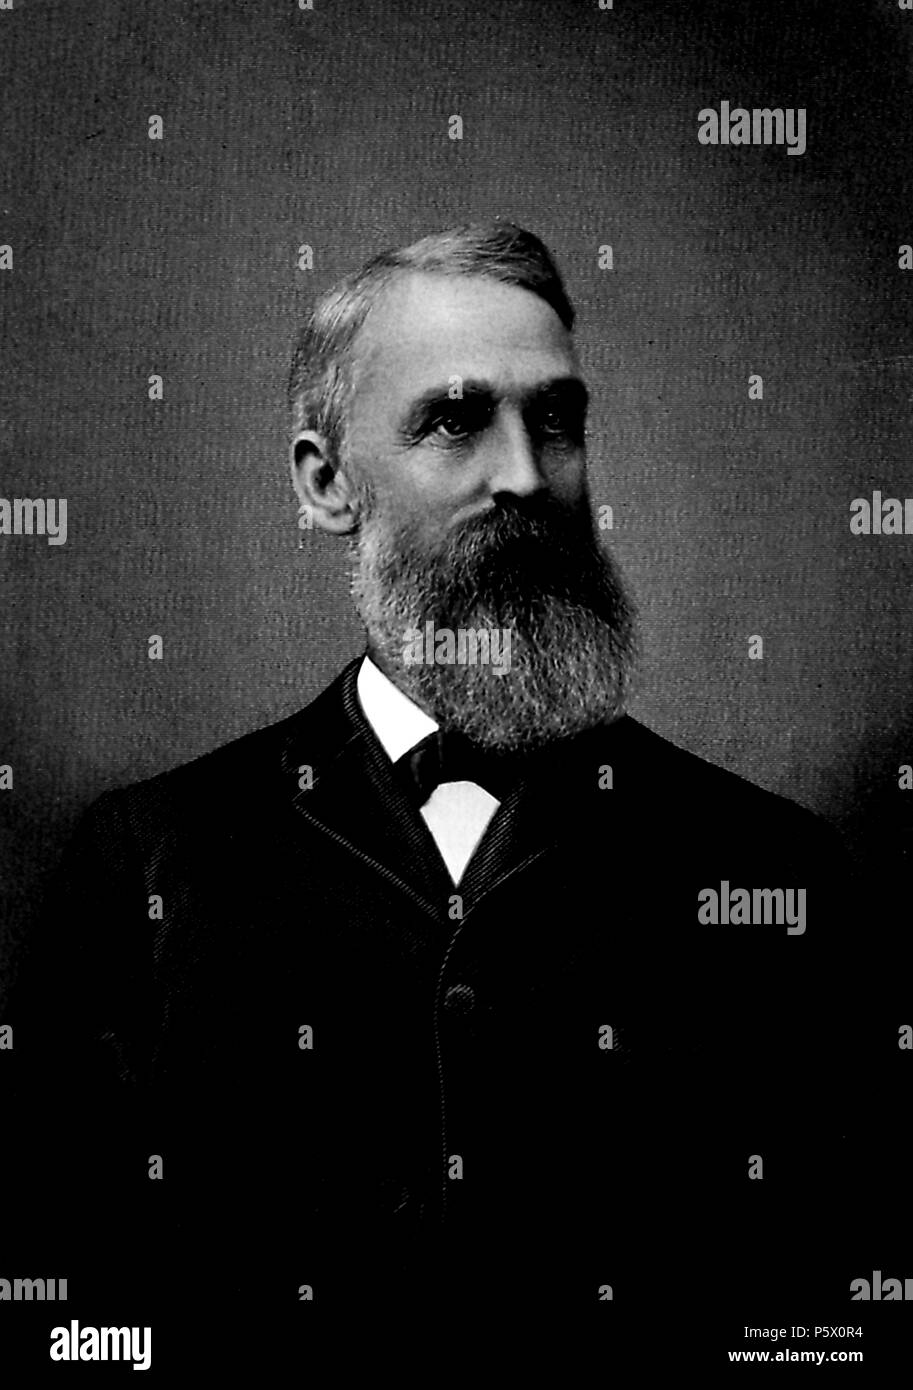 Black and white portrait photograph of George H Vose, prominent California agriculturalist, shown from the waist up, his head turned in three-quarter view, with a bushy grey beard and mustache, a dark suit, and a thoughtful expression on his face, from the volume 'History of the State of California and Biographical Record of Oakland and Environs, ' authored by JM (James Miller) Guinn, and published in Los Angeles by the Historic Record Co, 1907. Courtesy Internet Archive. () Stock Photo